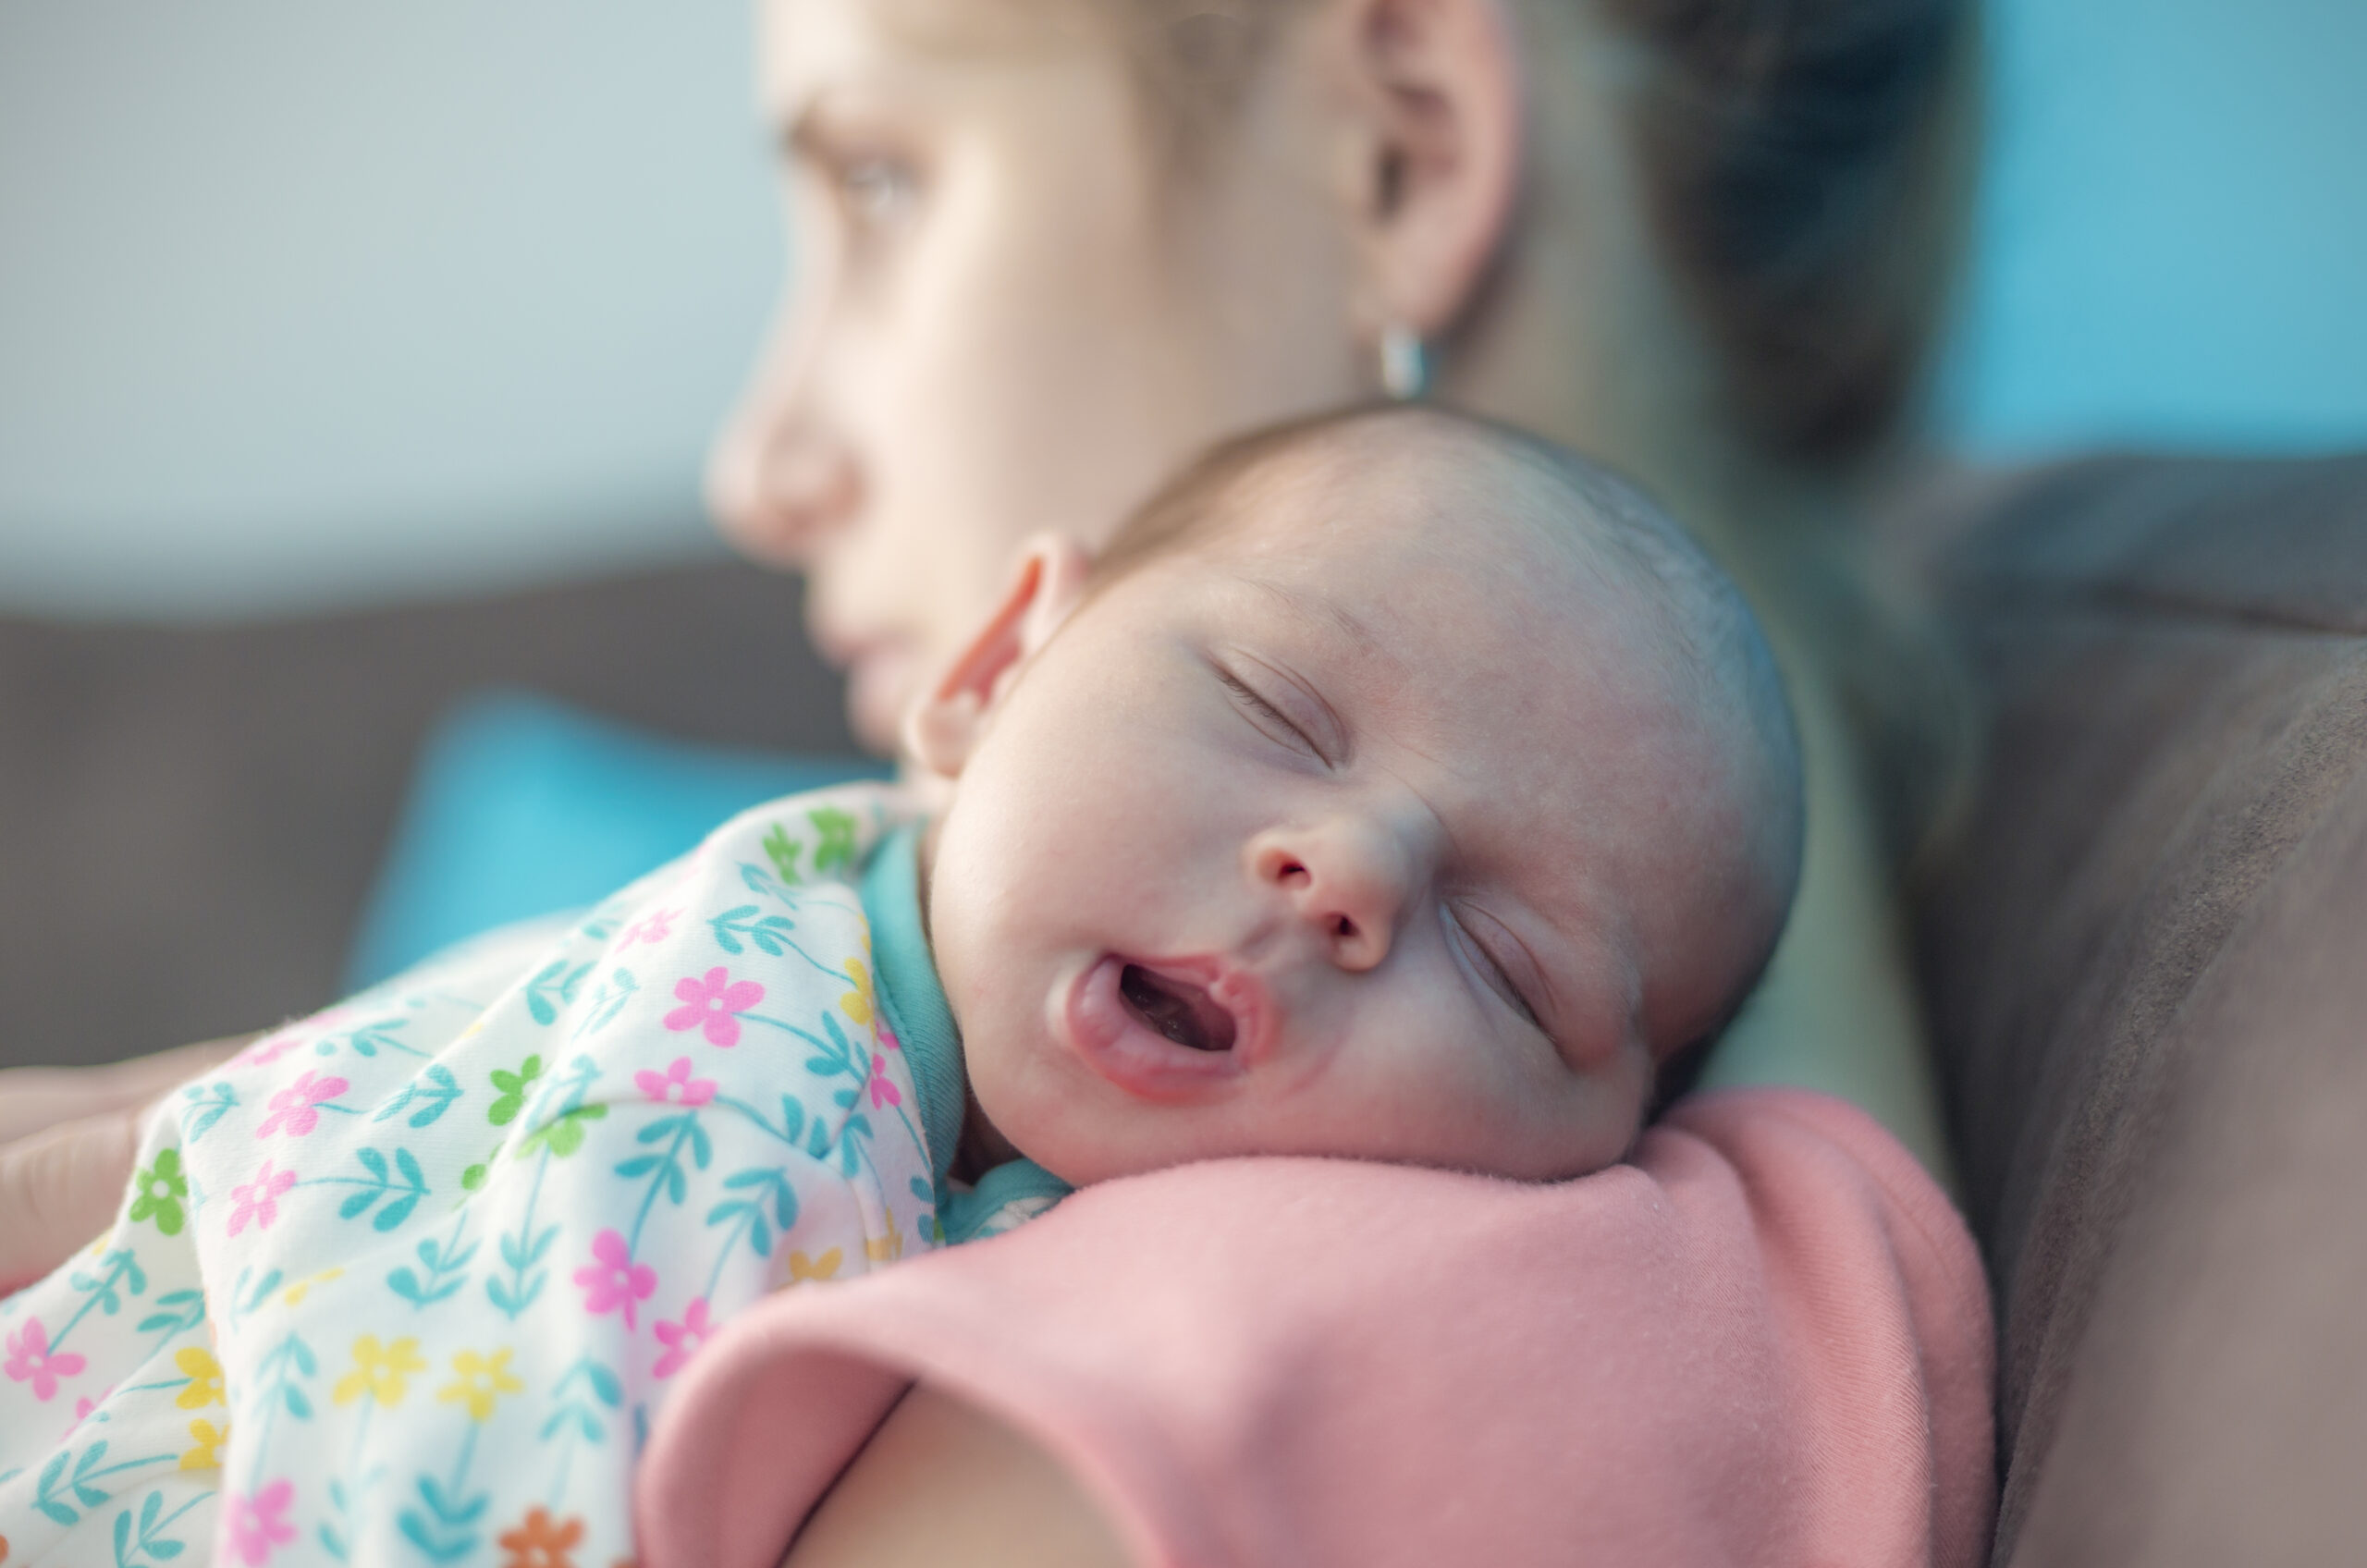 A new drug for postpartum depression could help everyone